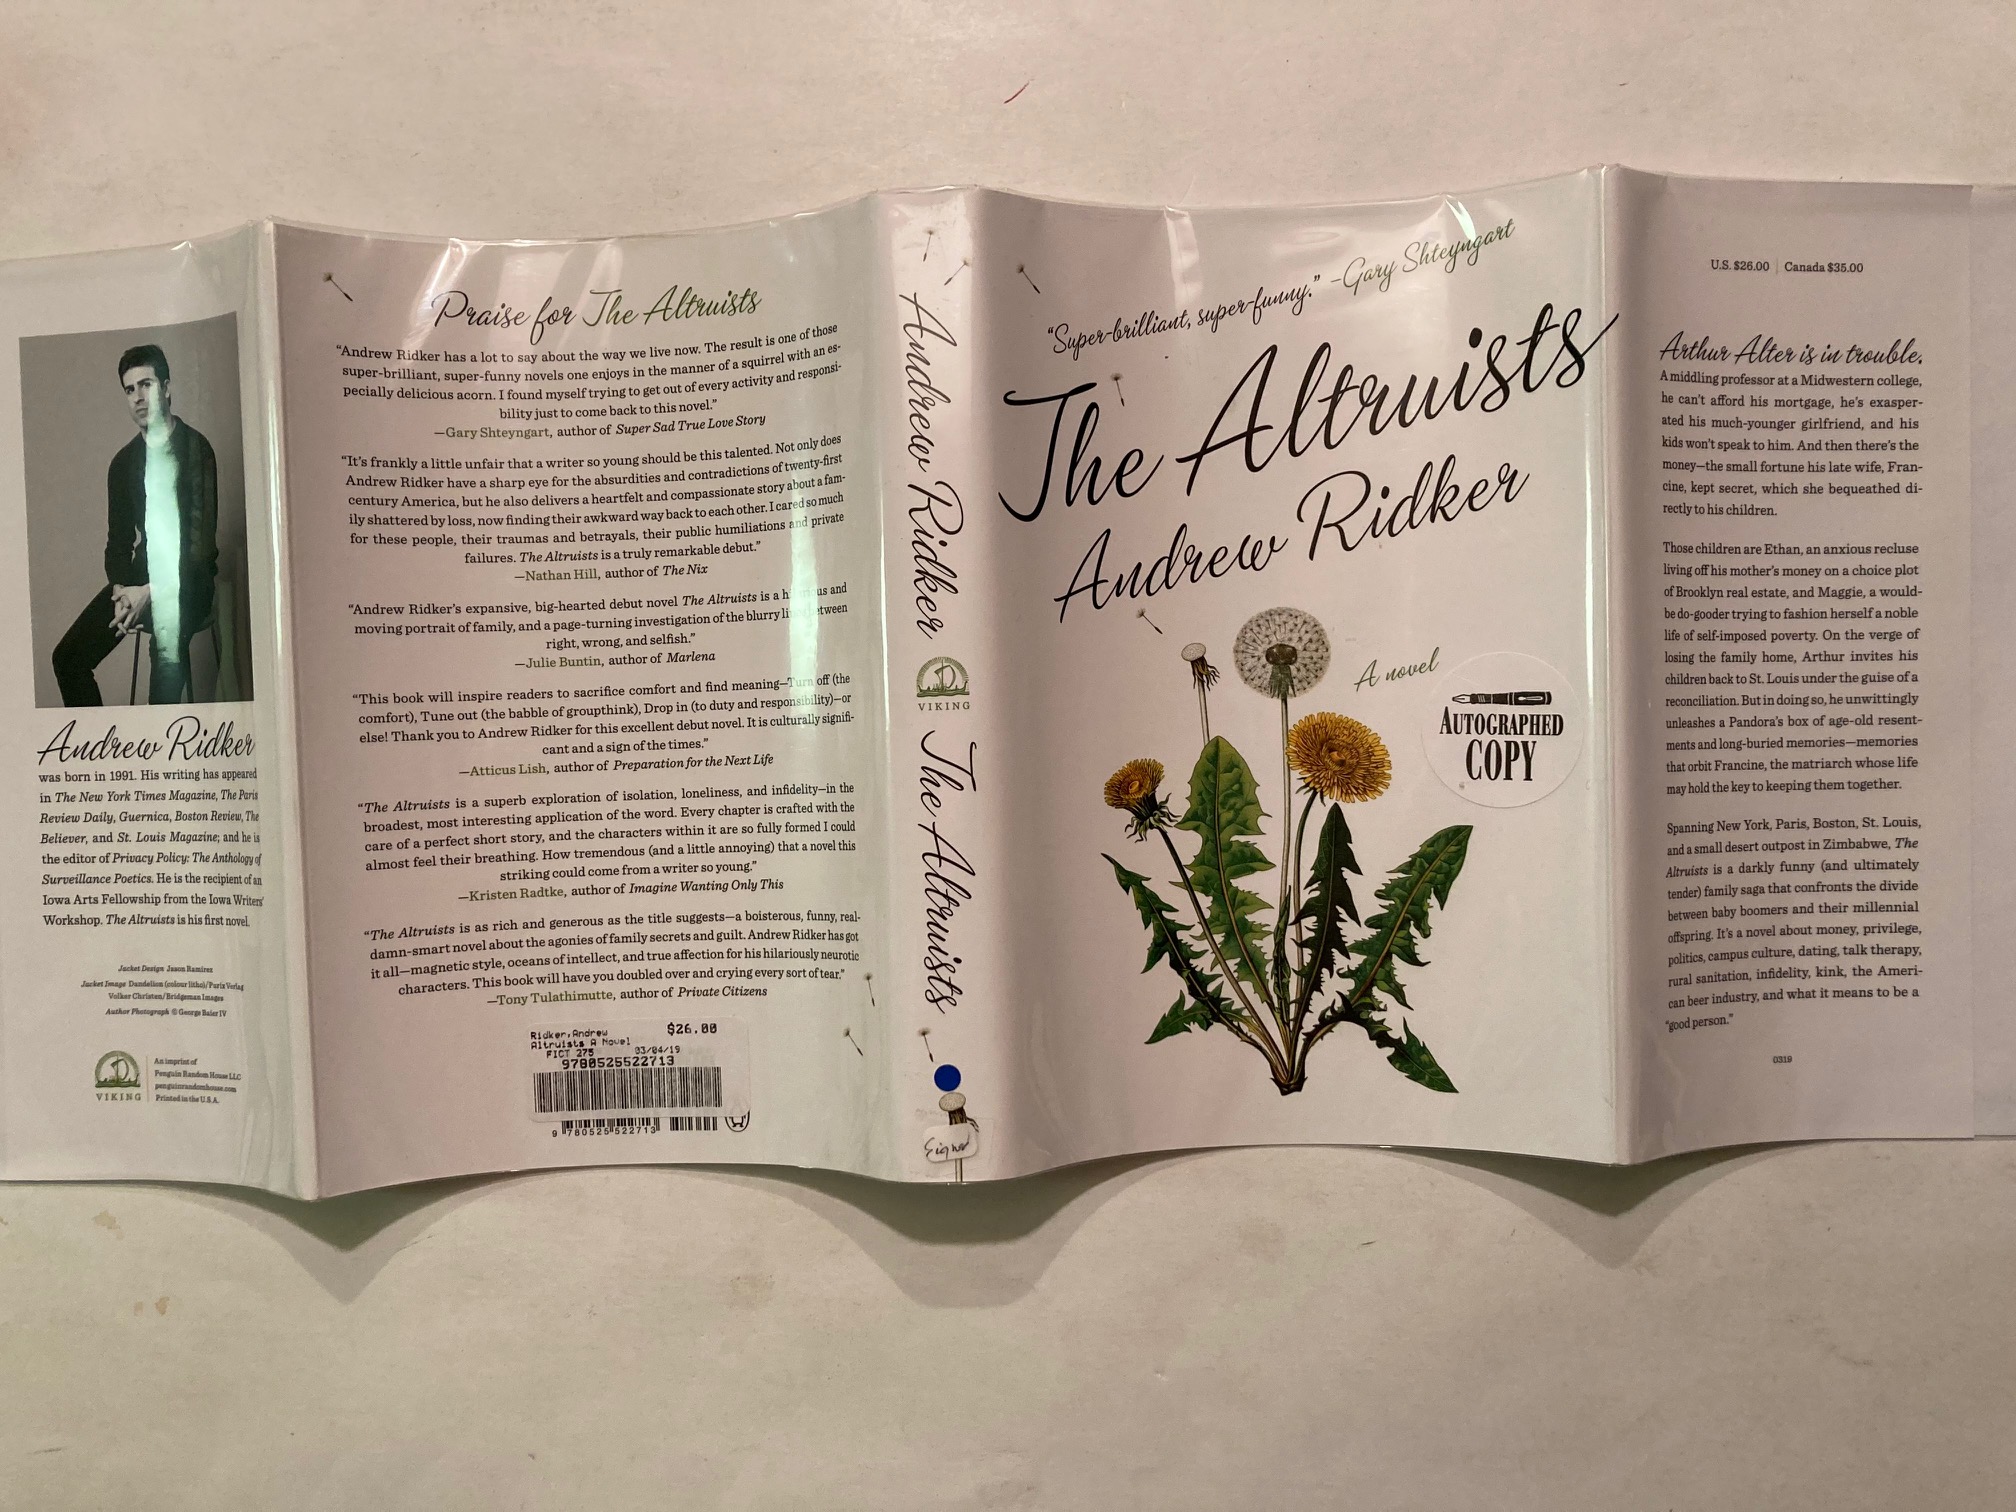 The Altruists: A Novel [SIGNED & DATED] de Ridker, Andrew: New Hardcover  (2019) 1st Edition, Signed by Author(s) | OldBooksFromTheBasement